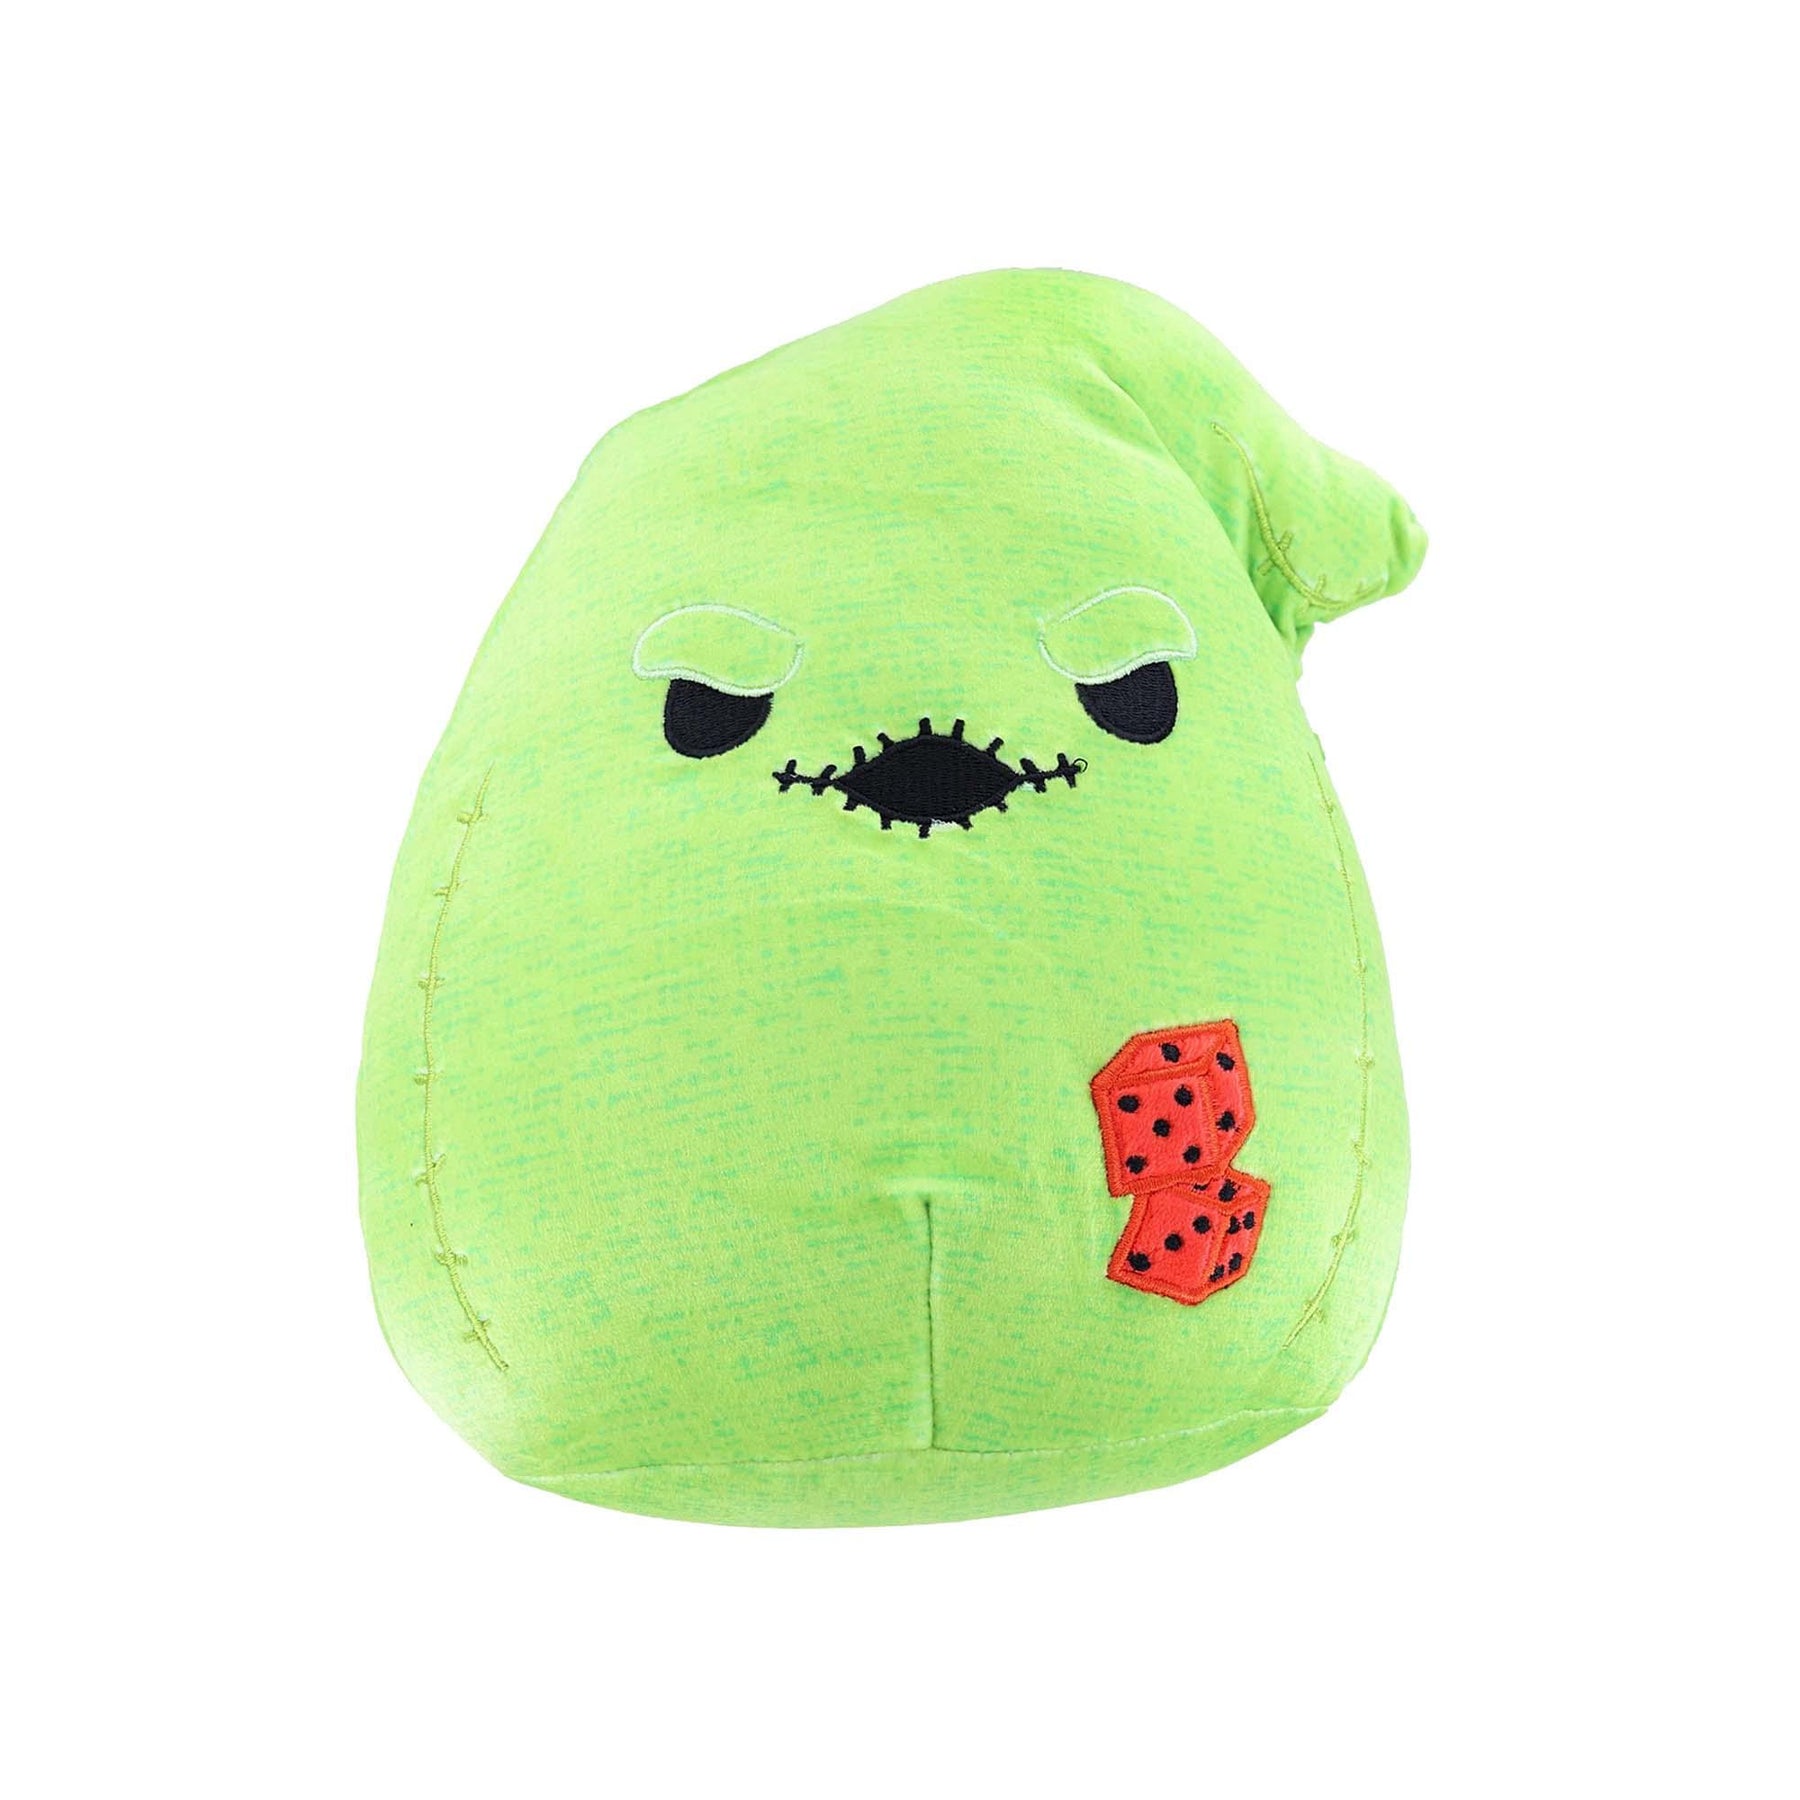 Nightmare Before Christmas Squishmallow 8 Inch Plush | Oogie Boogie